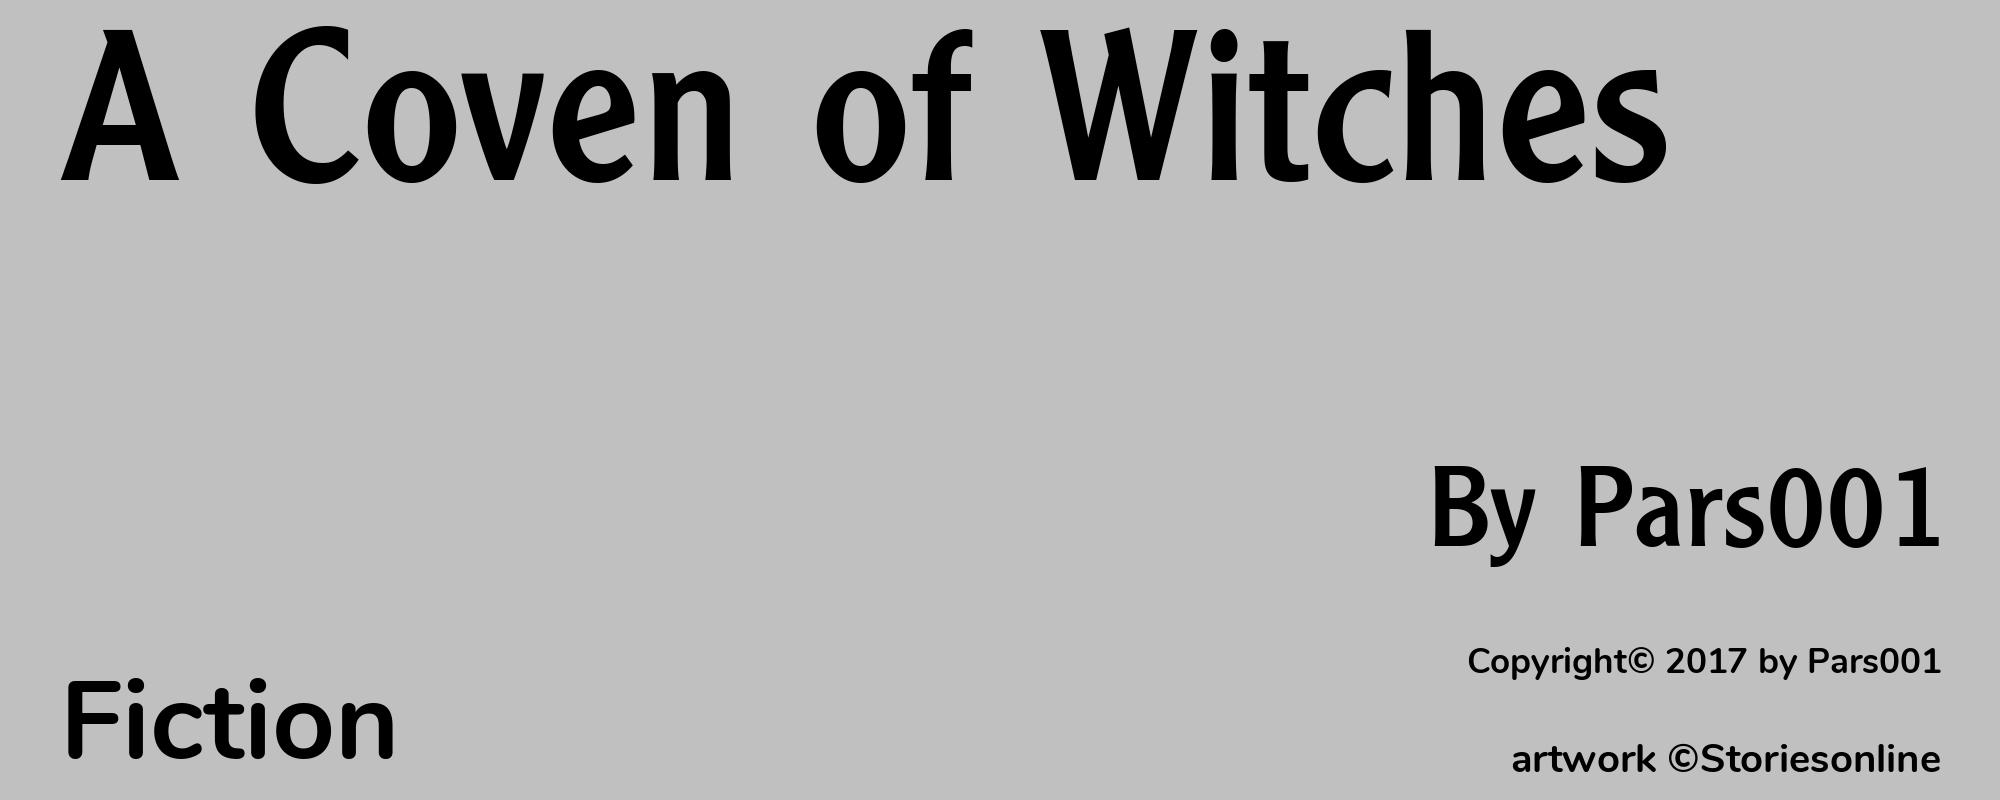 A Coven of Witches - Cover